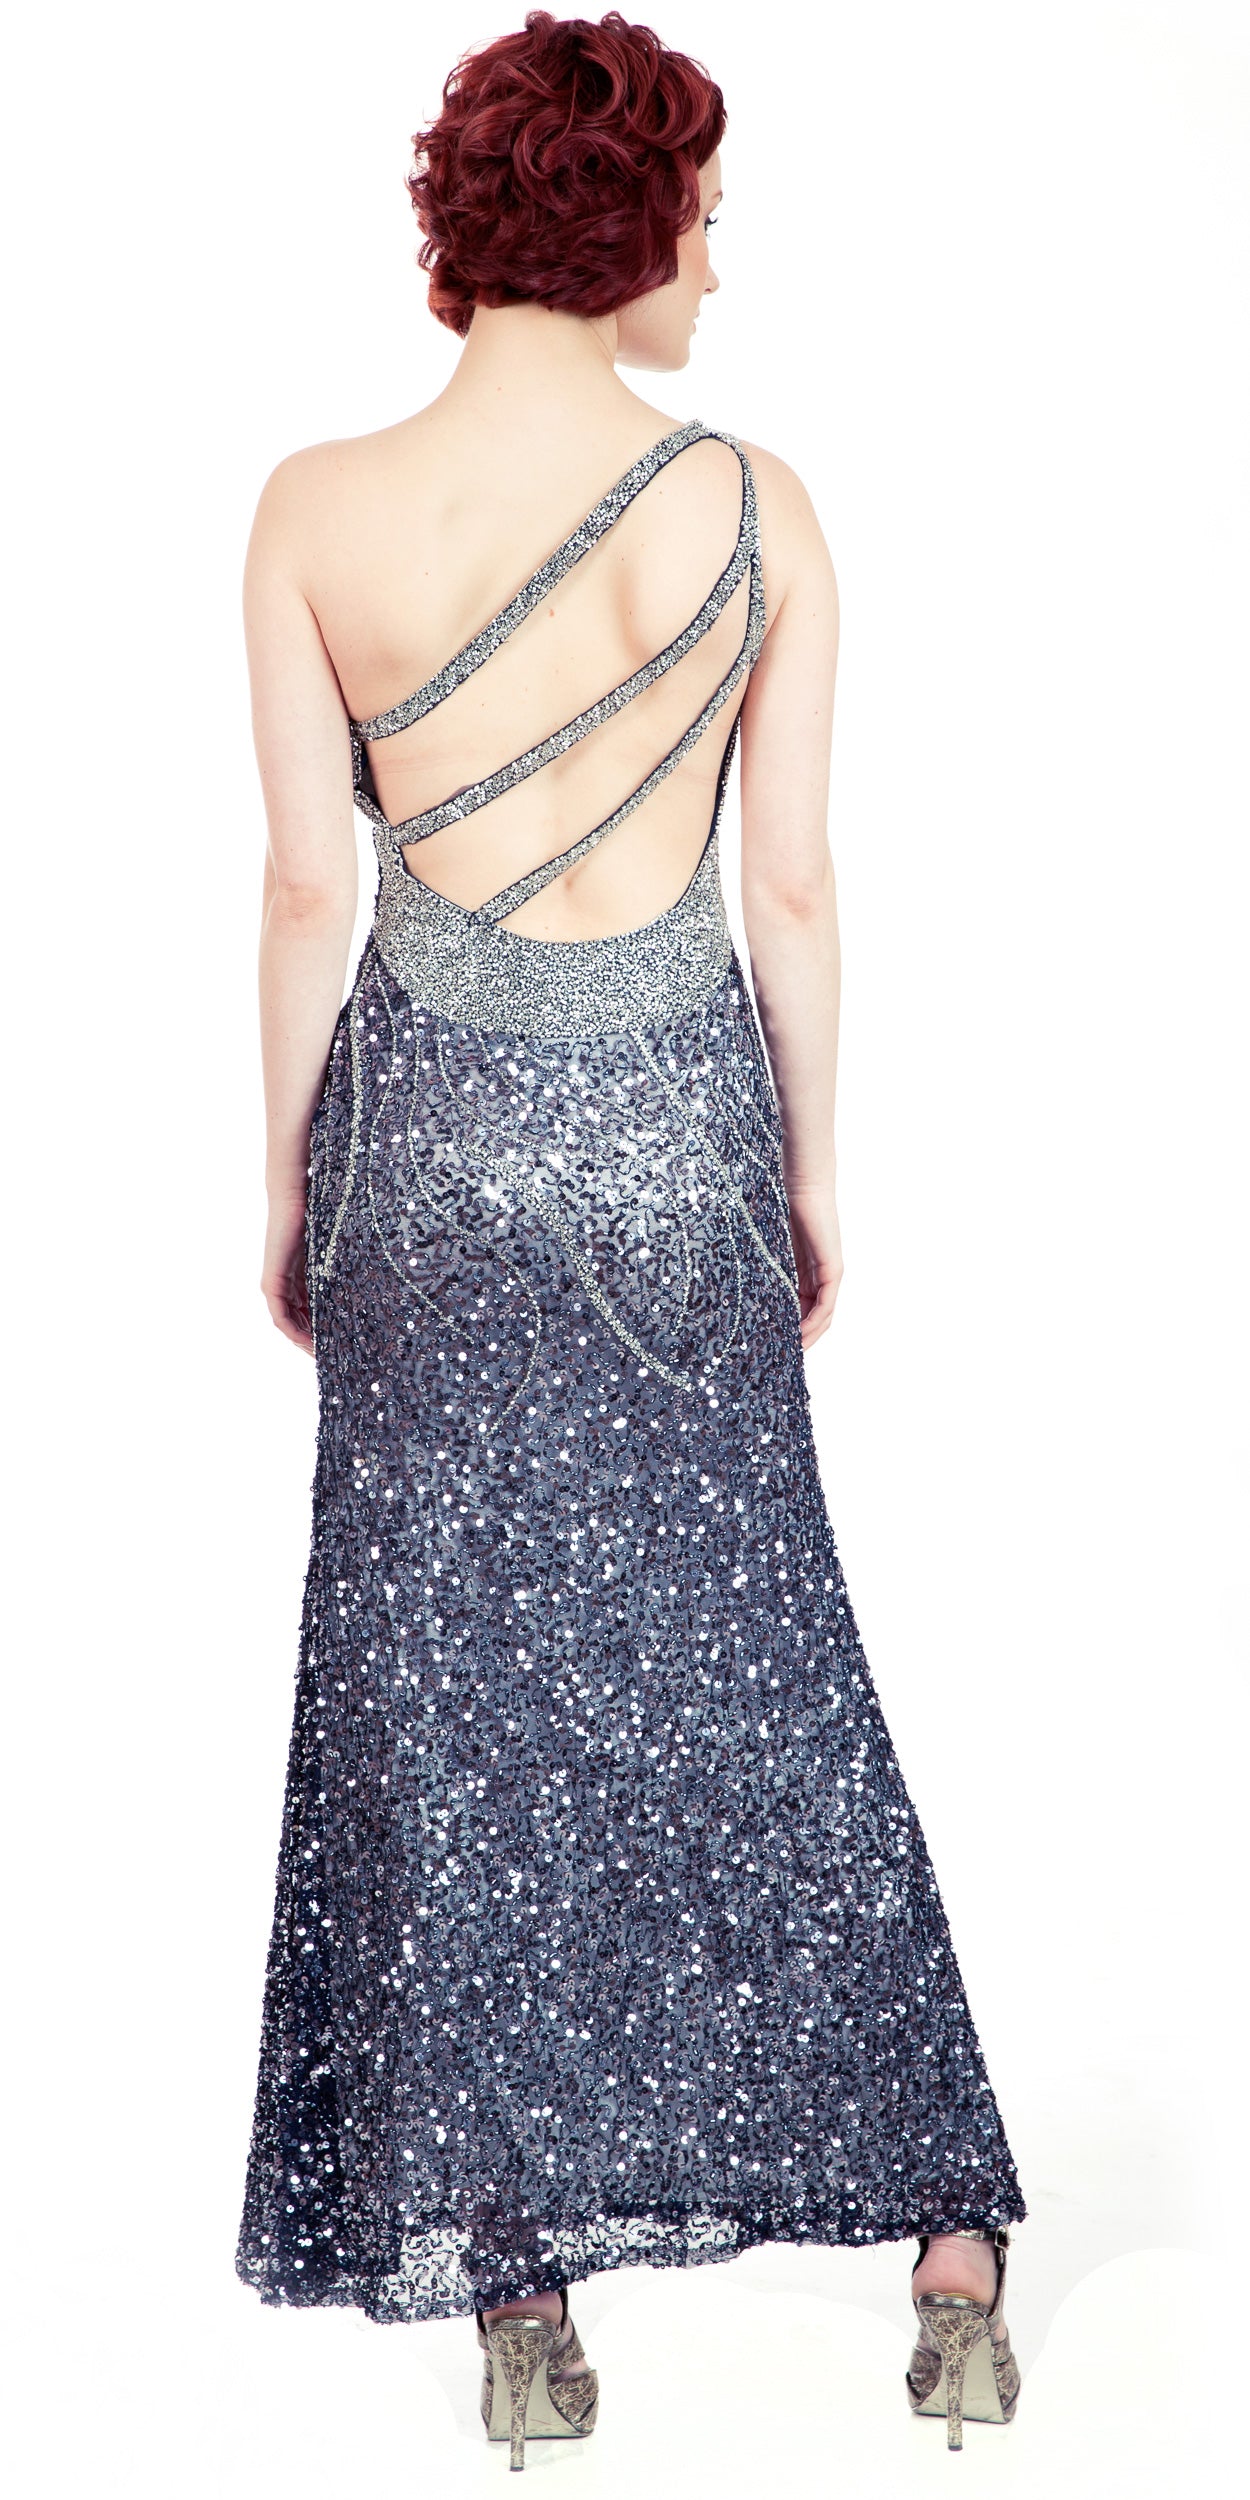 Image of One Shoulder Sparkling Beads & Sequins Long Prom Dress back in Navy/Silver